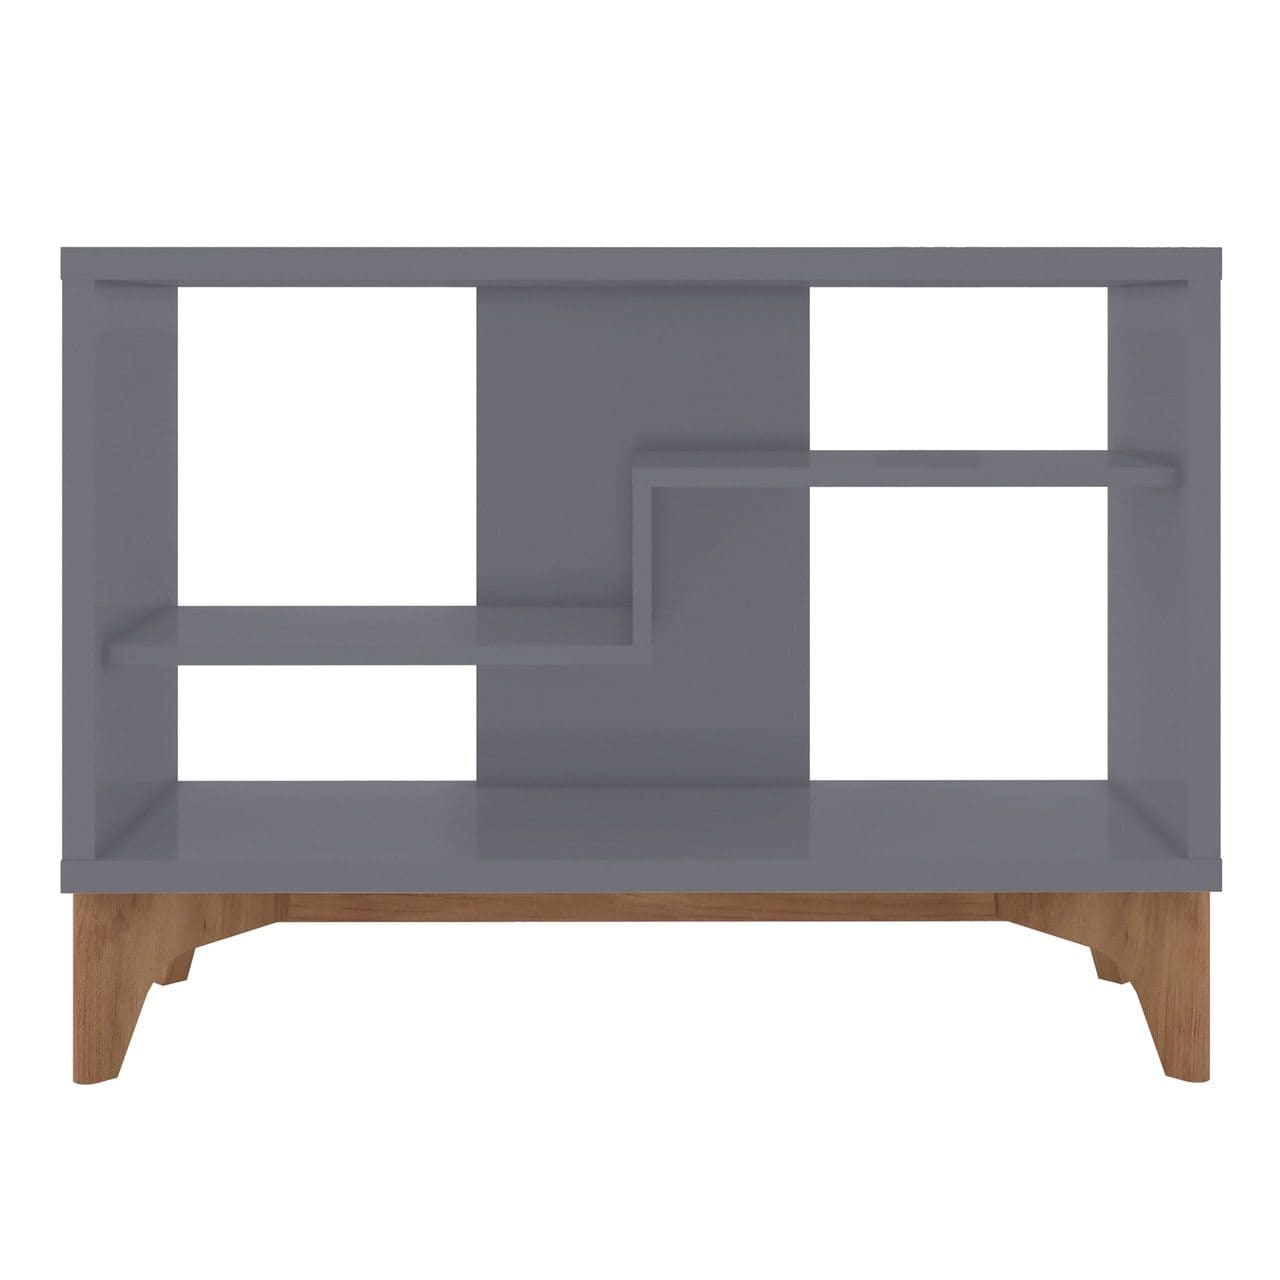 Manhattan Comfort Gowanus Modern Accent Display Sideboard with 2 Shelves in Grey 8LC3 810025594121